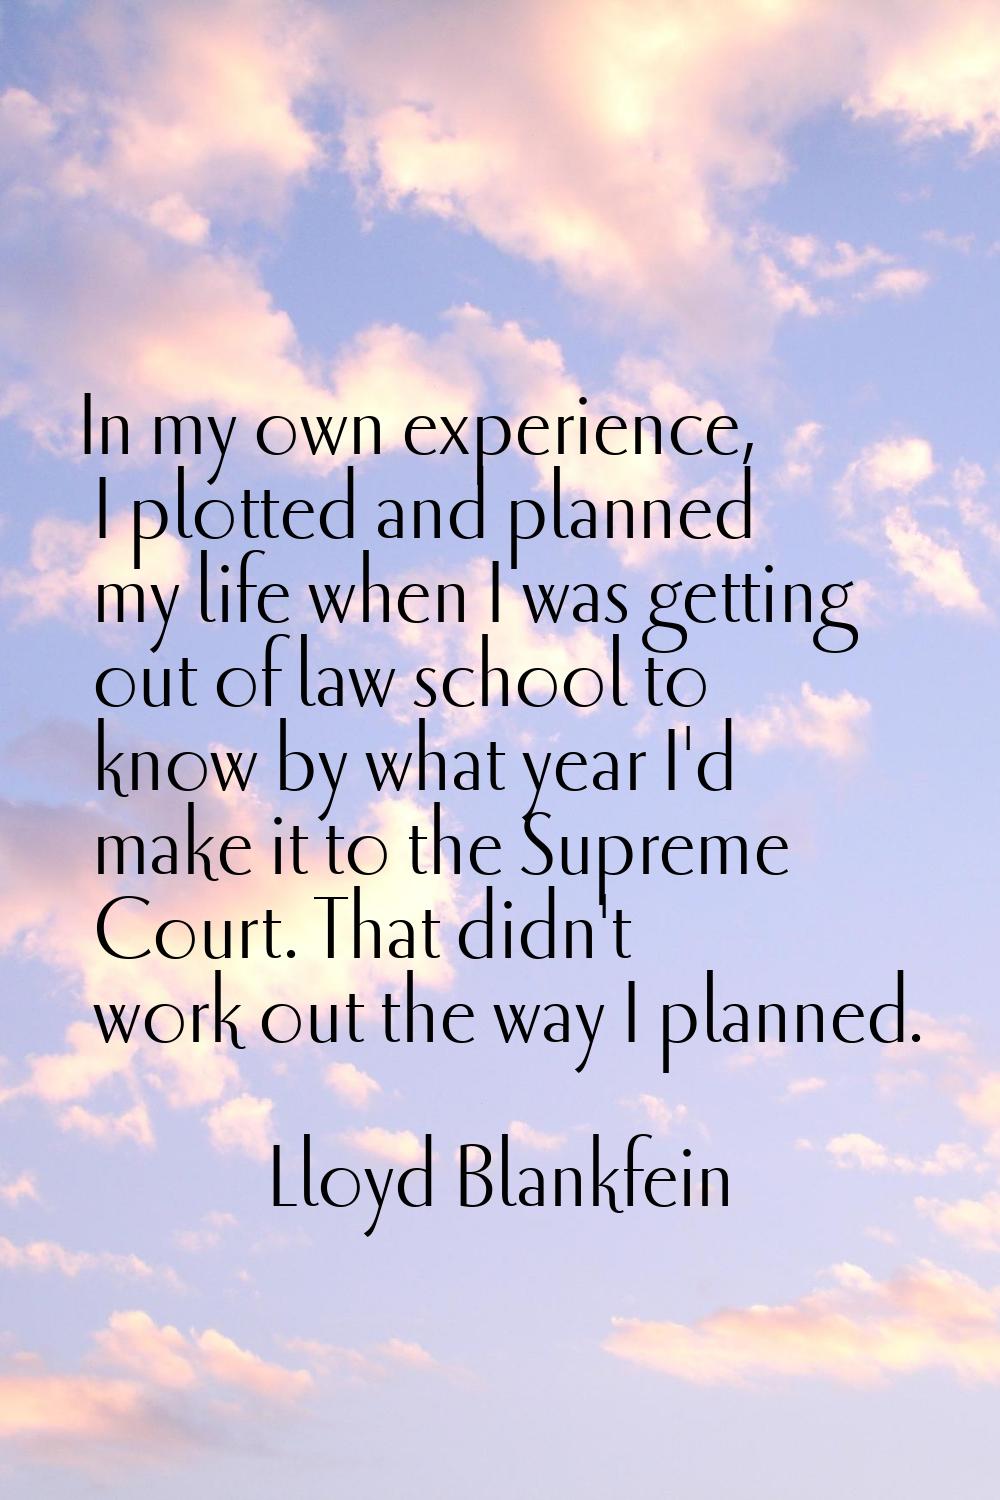 In my own experience, I plotted and planned my life when I was getting out of law school to know by